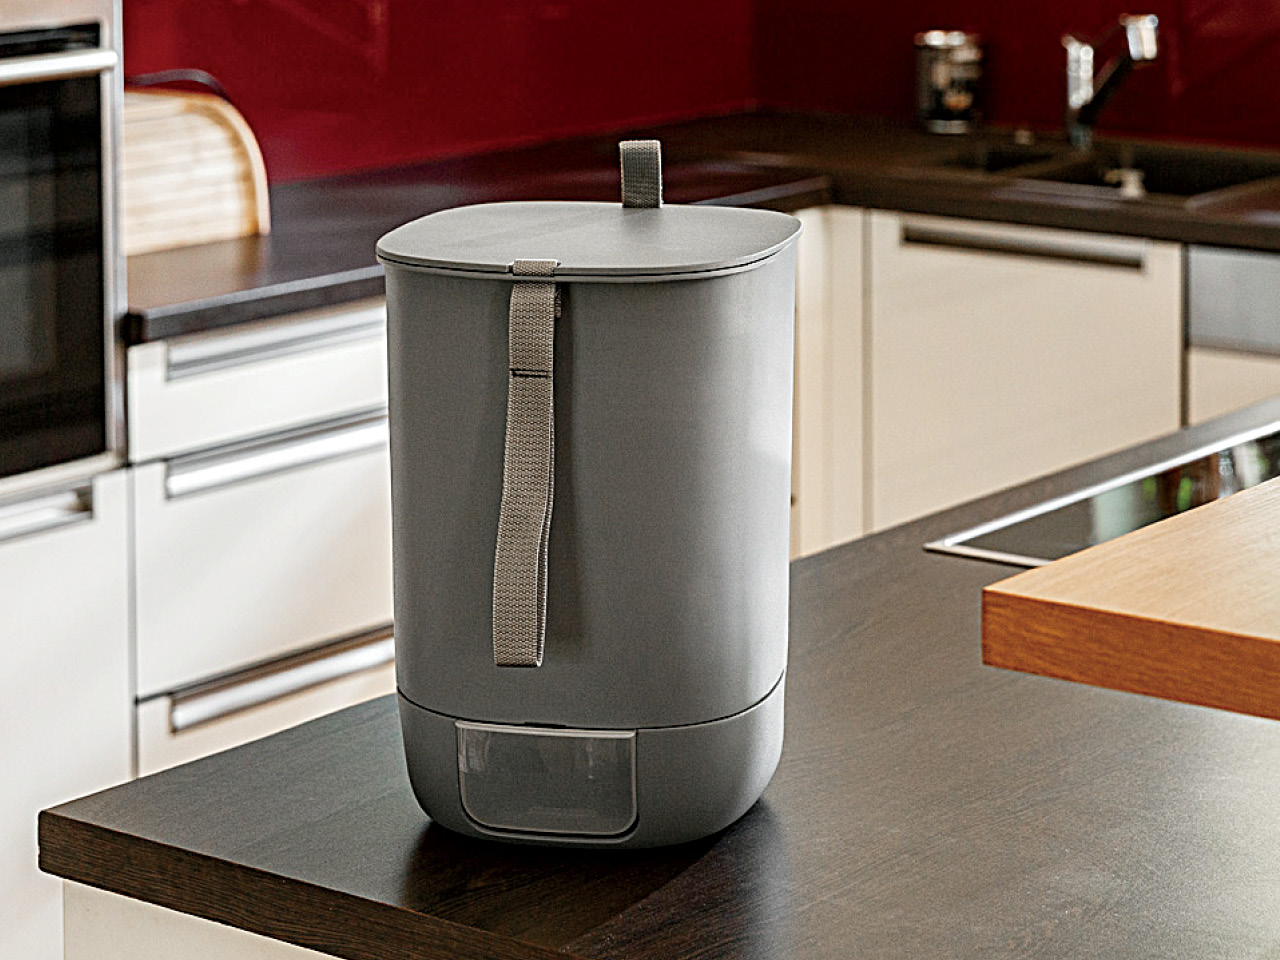 The Urbalive Bokashi Countertop Composter resting atop a kitchen counter